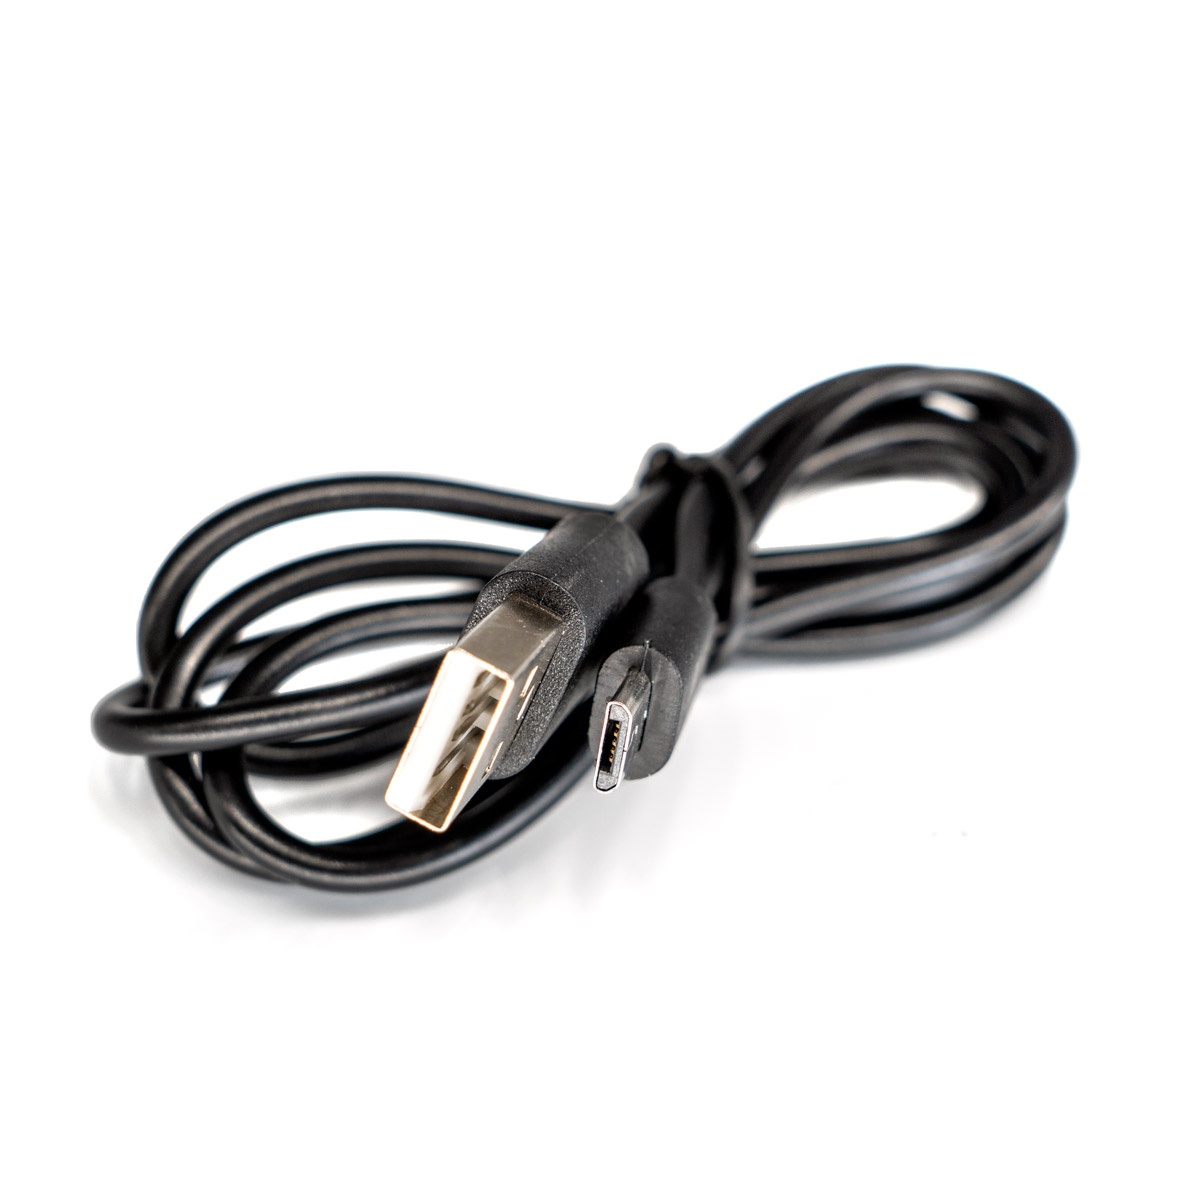 3' Micro-USB Cable for CHI Palm